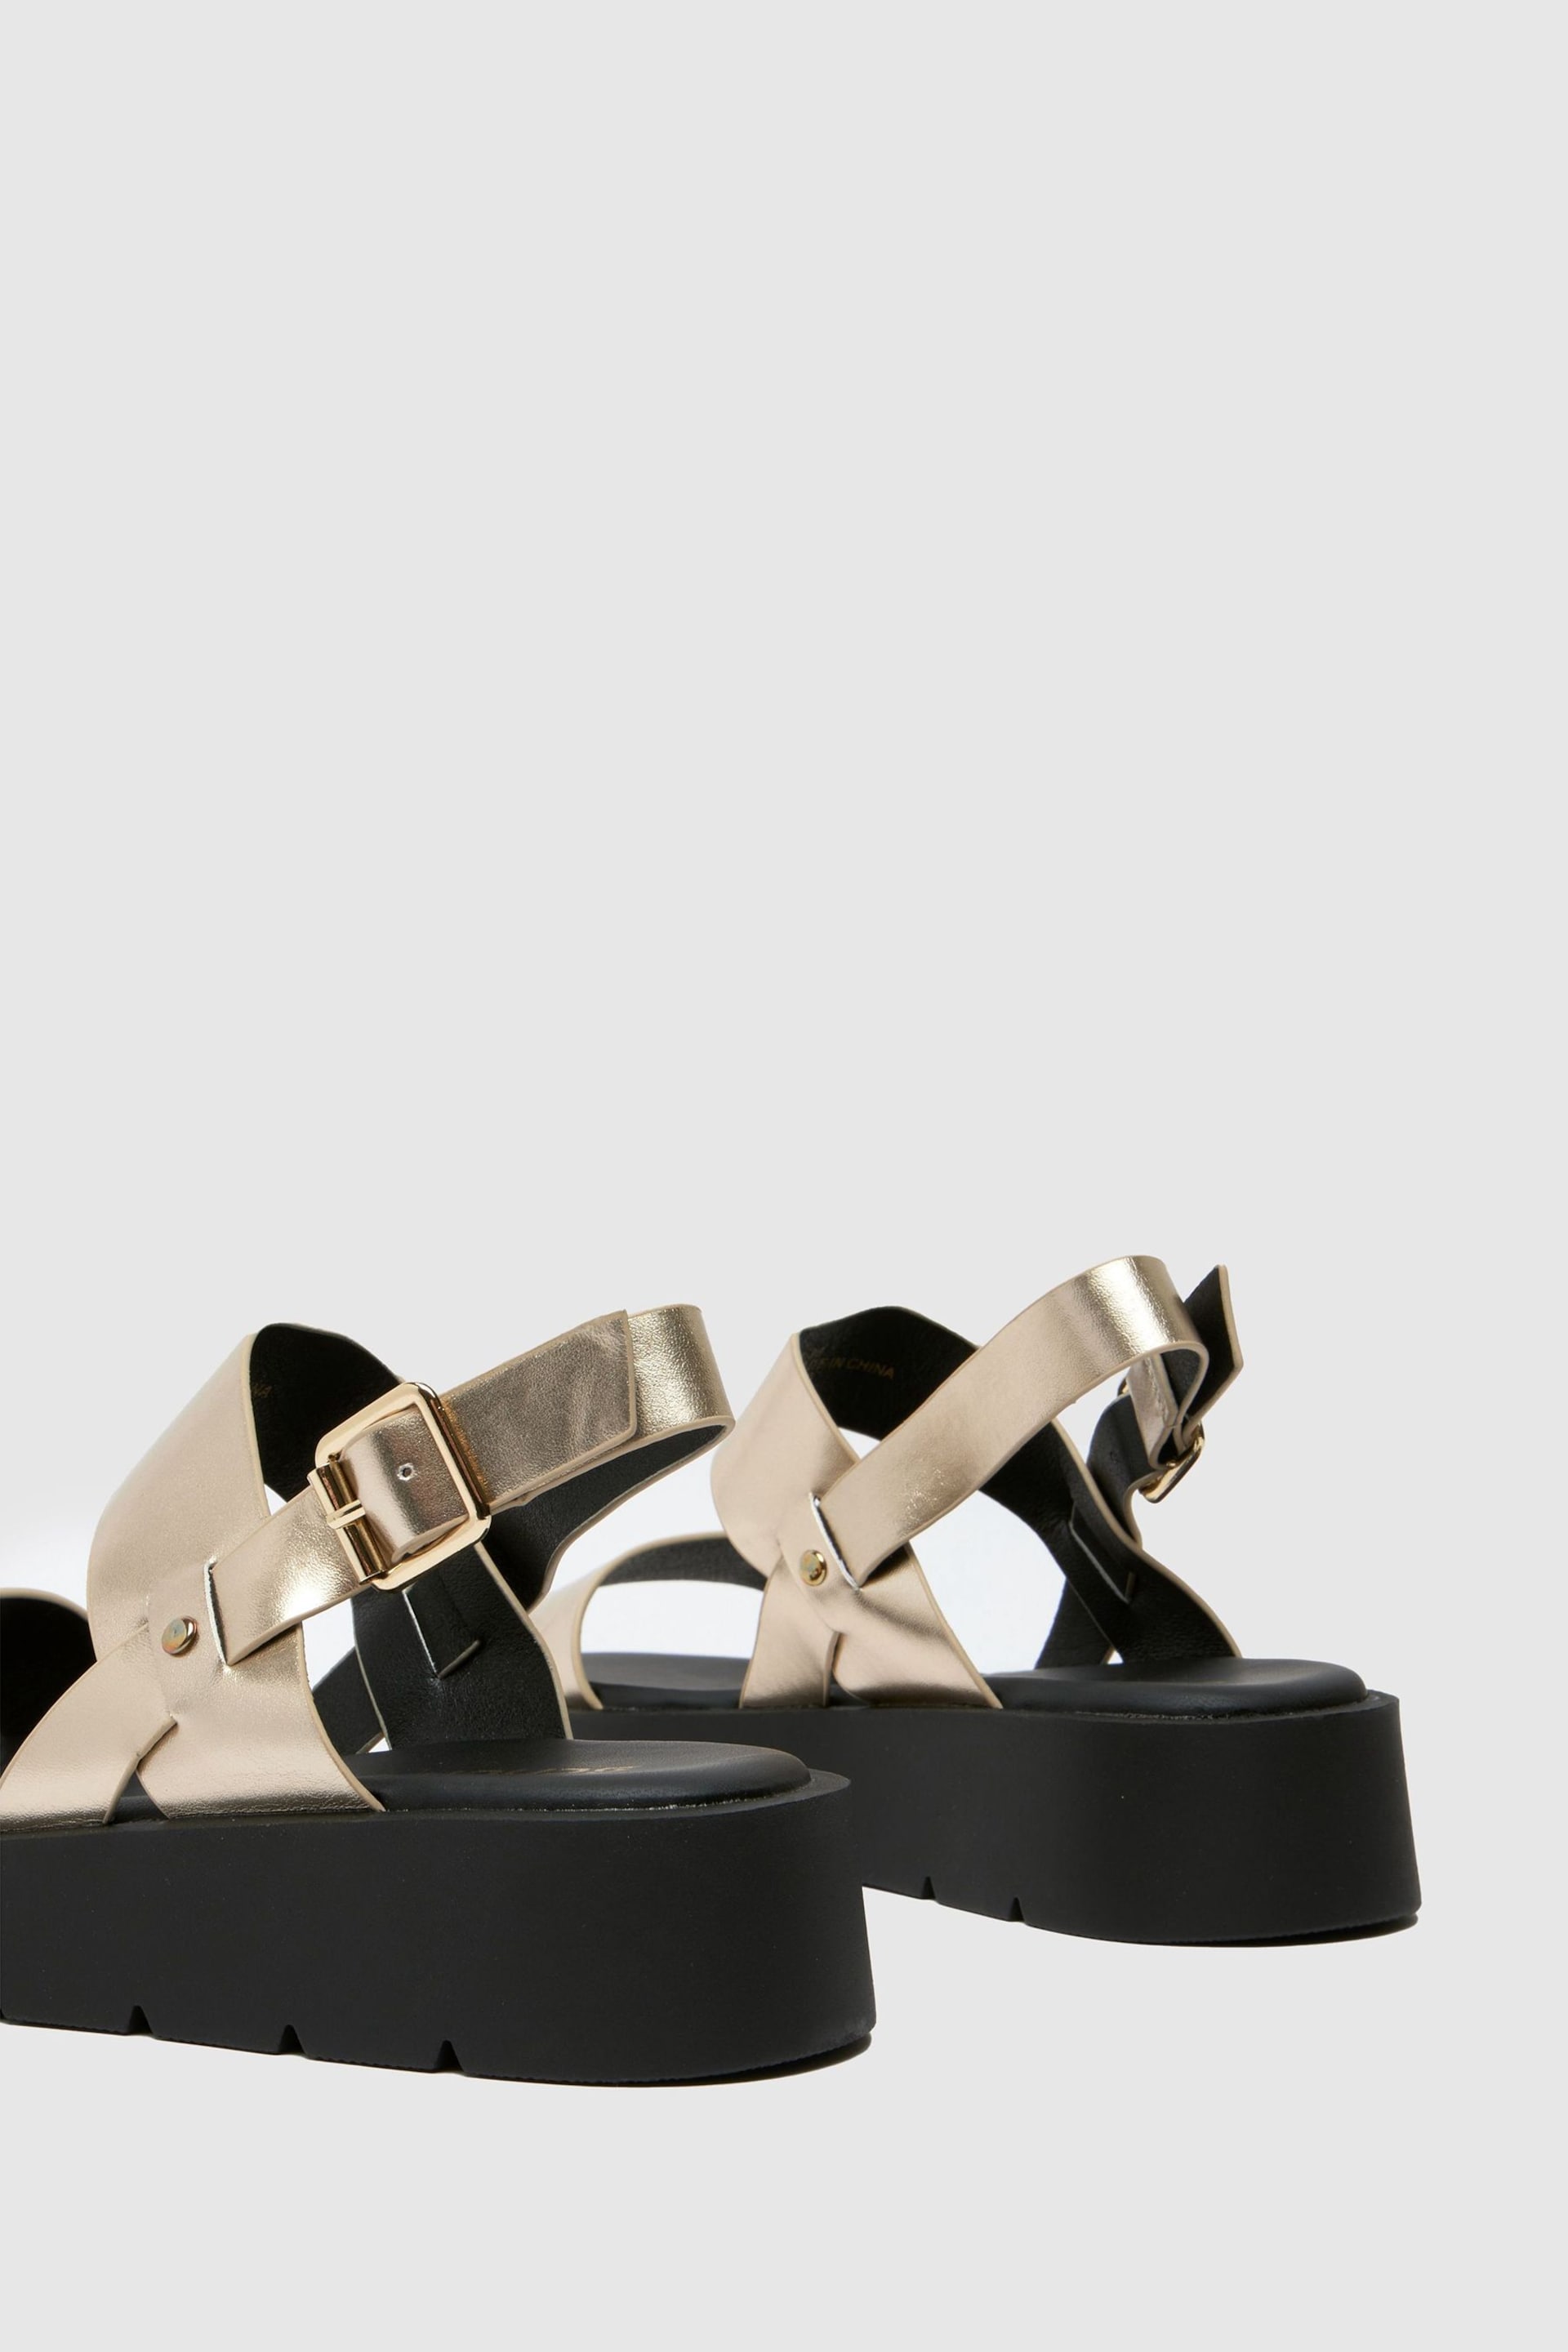 Schuh Tayla Chunky Sandals - Image 4 of 4